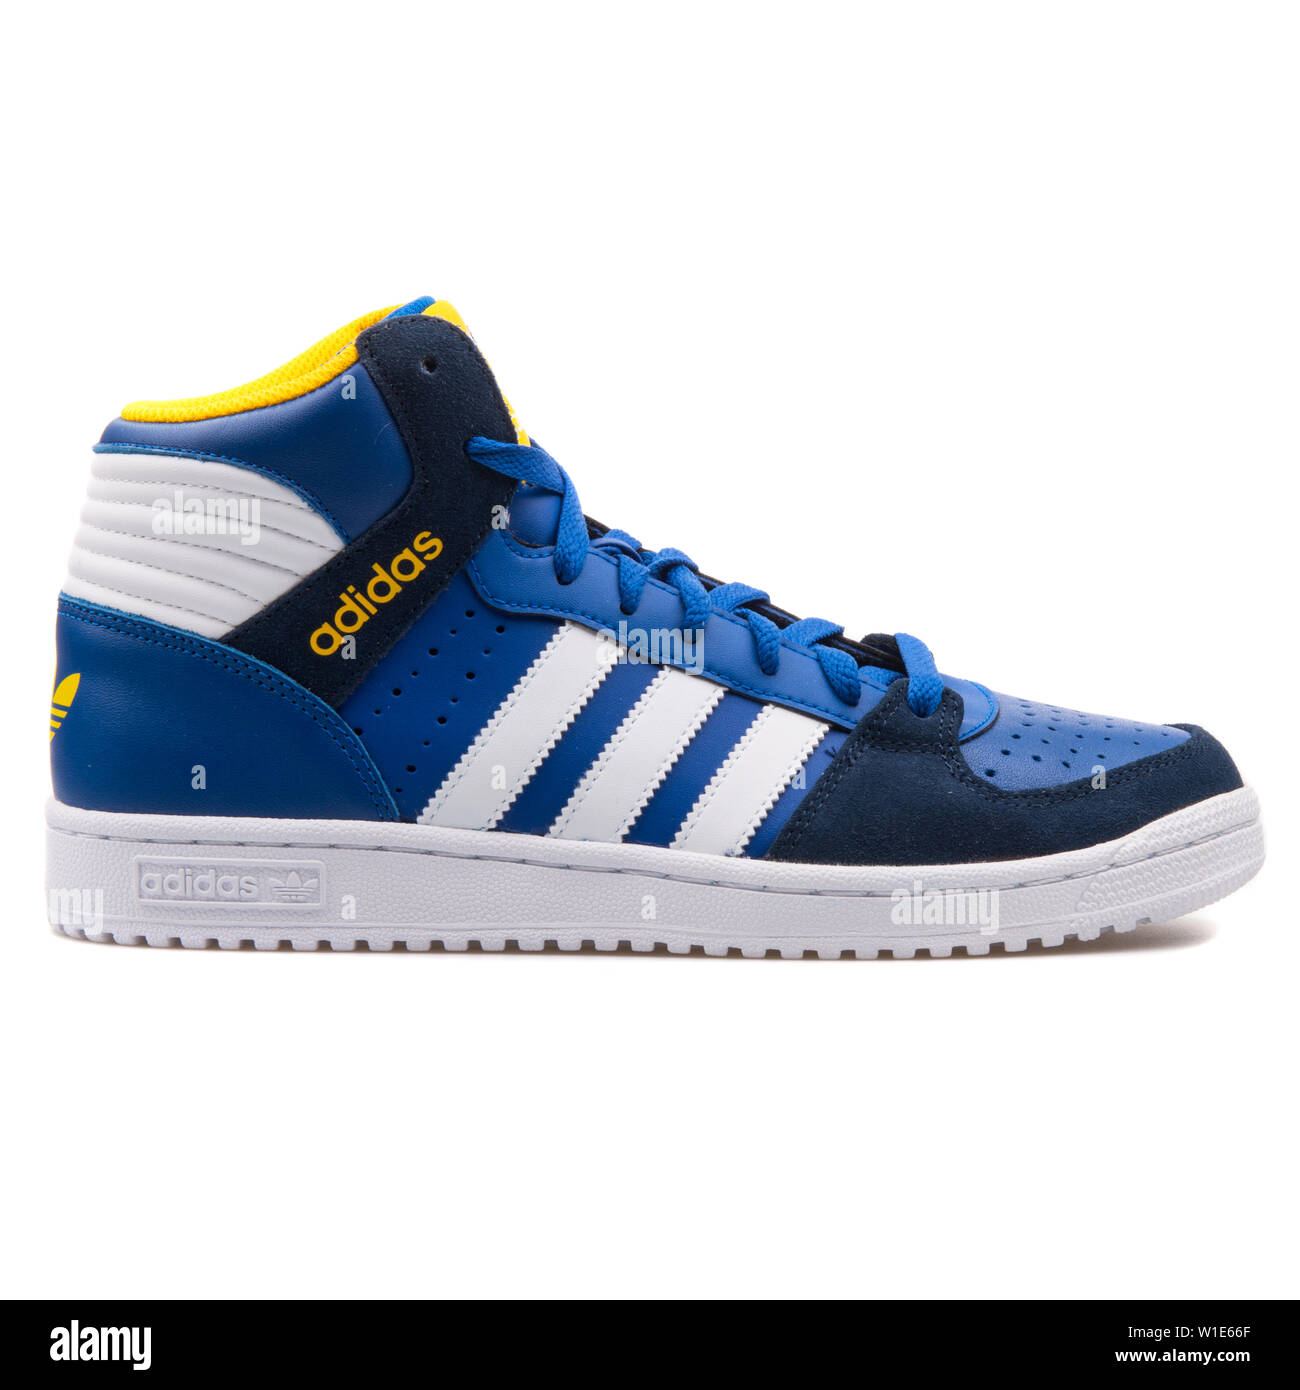 Adidas Pro High Resolution Stock Photography and Images - Alamy